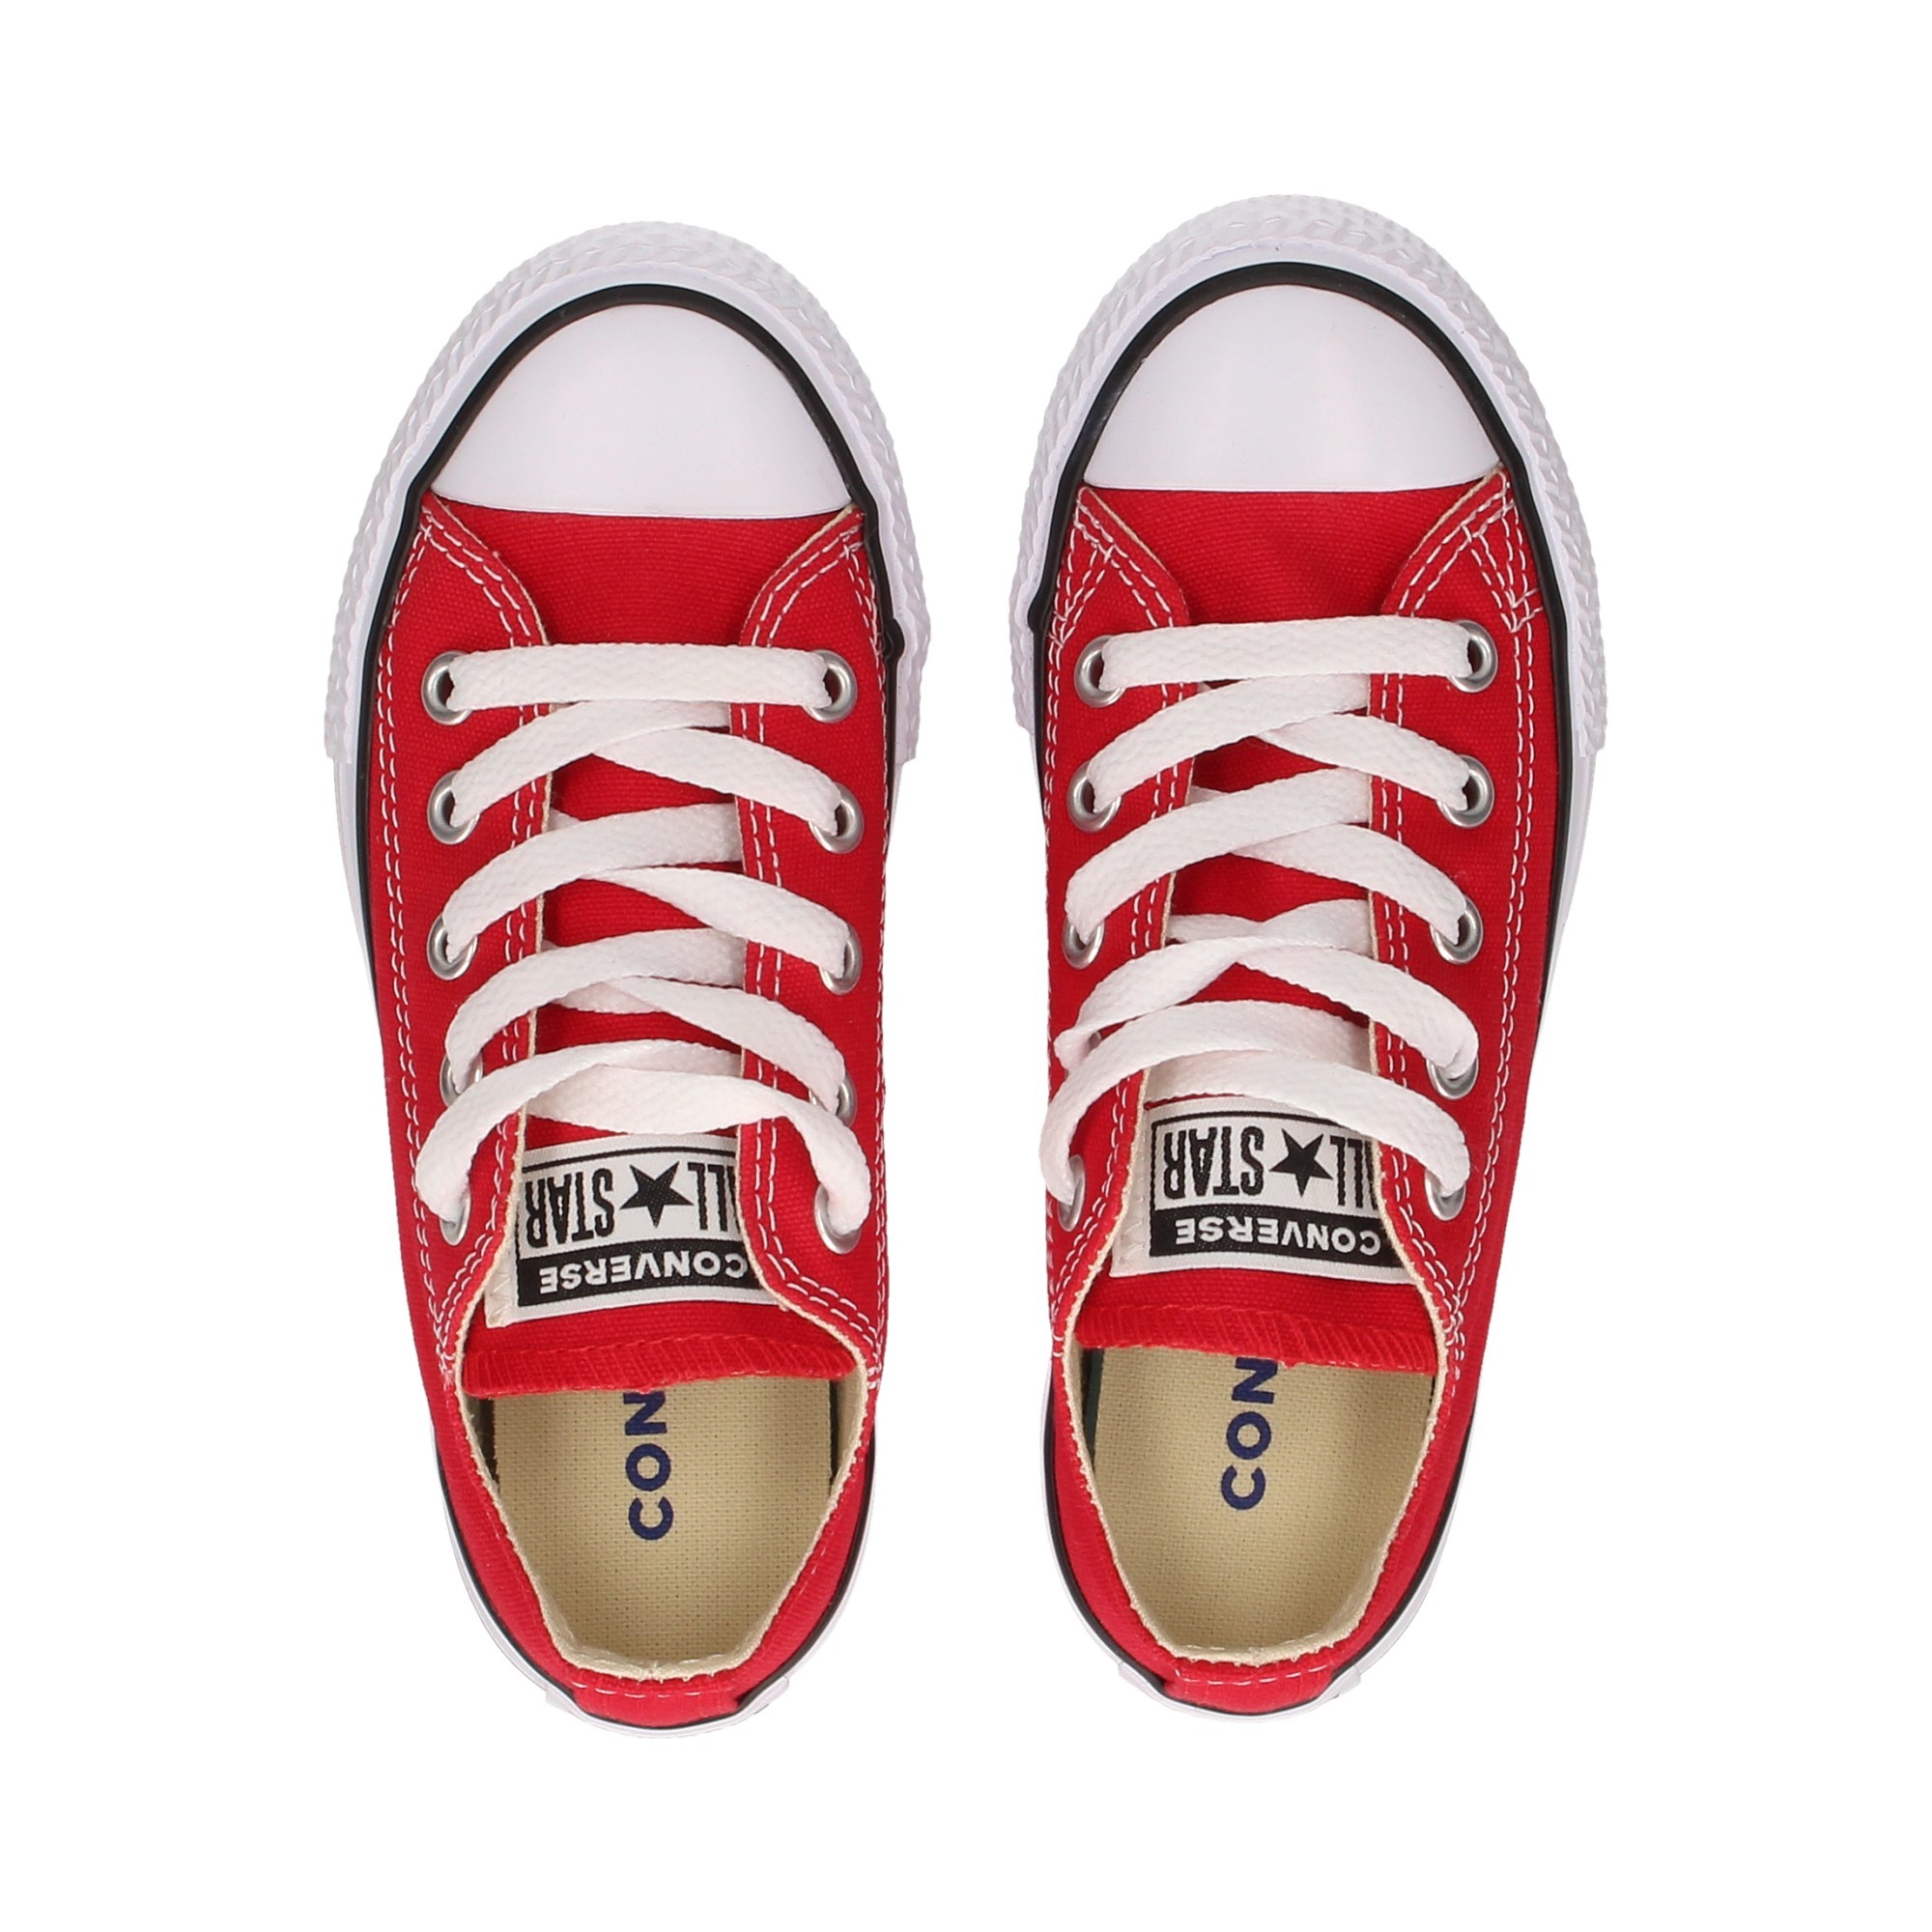 tennis-all-star-red-canvas